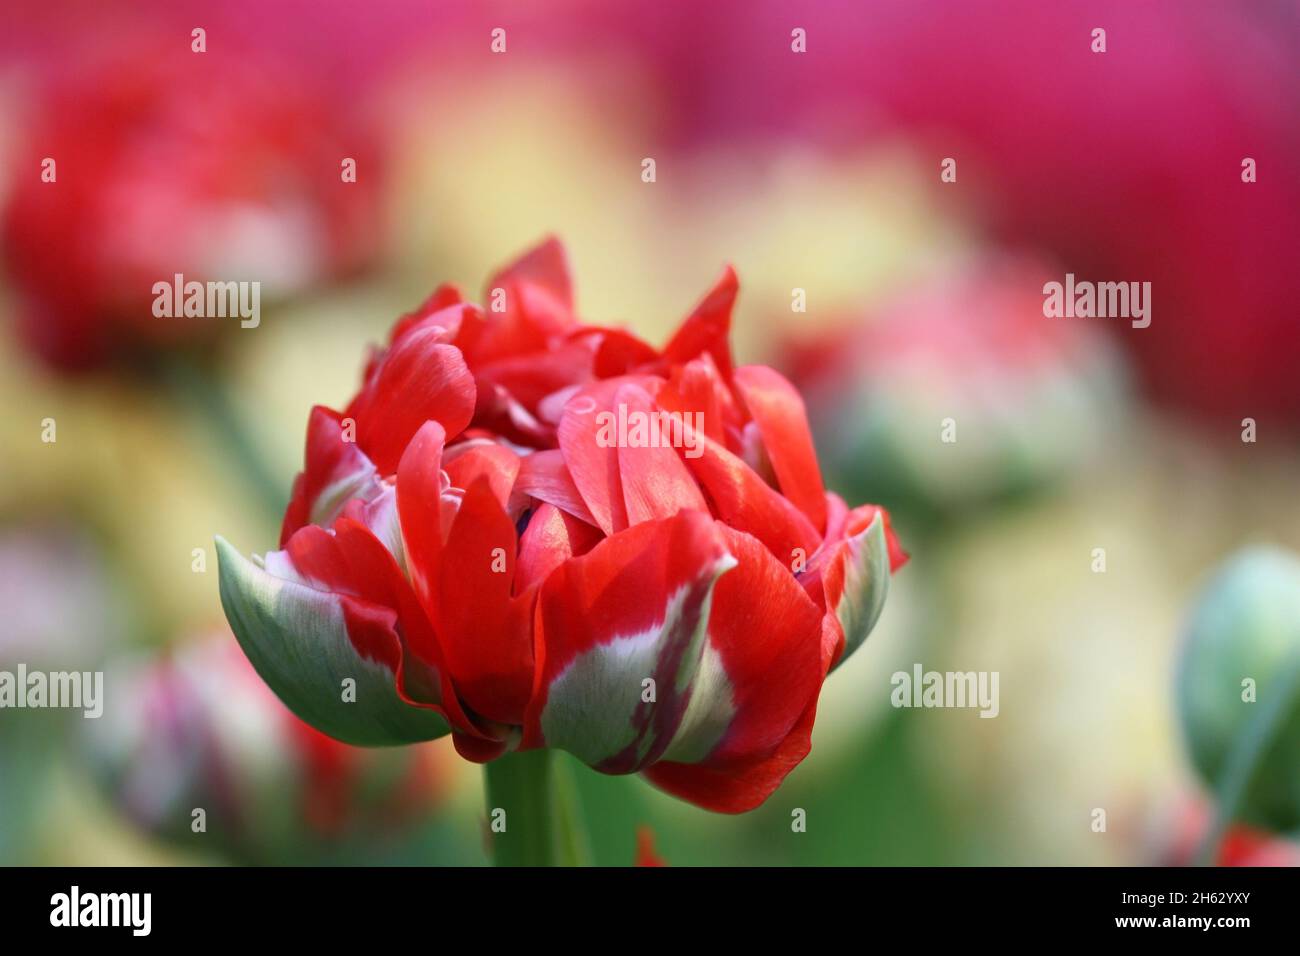 Tulip of a grade of 'Rococo' a close up horizontally on blurring a background.Liliaceae Family. Tulipa. Stock Photo